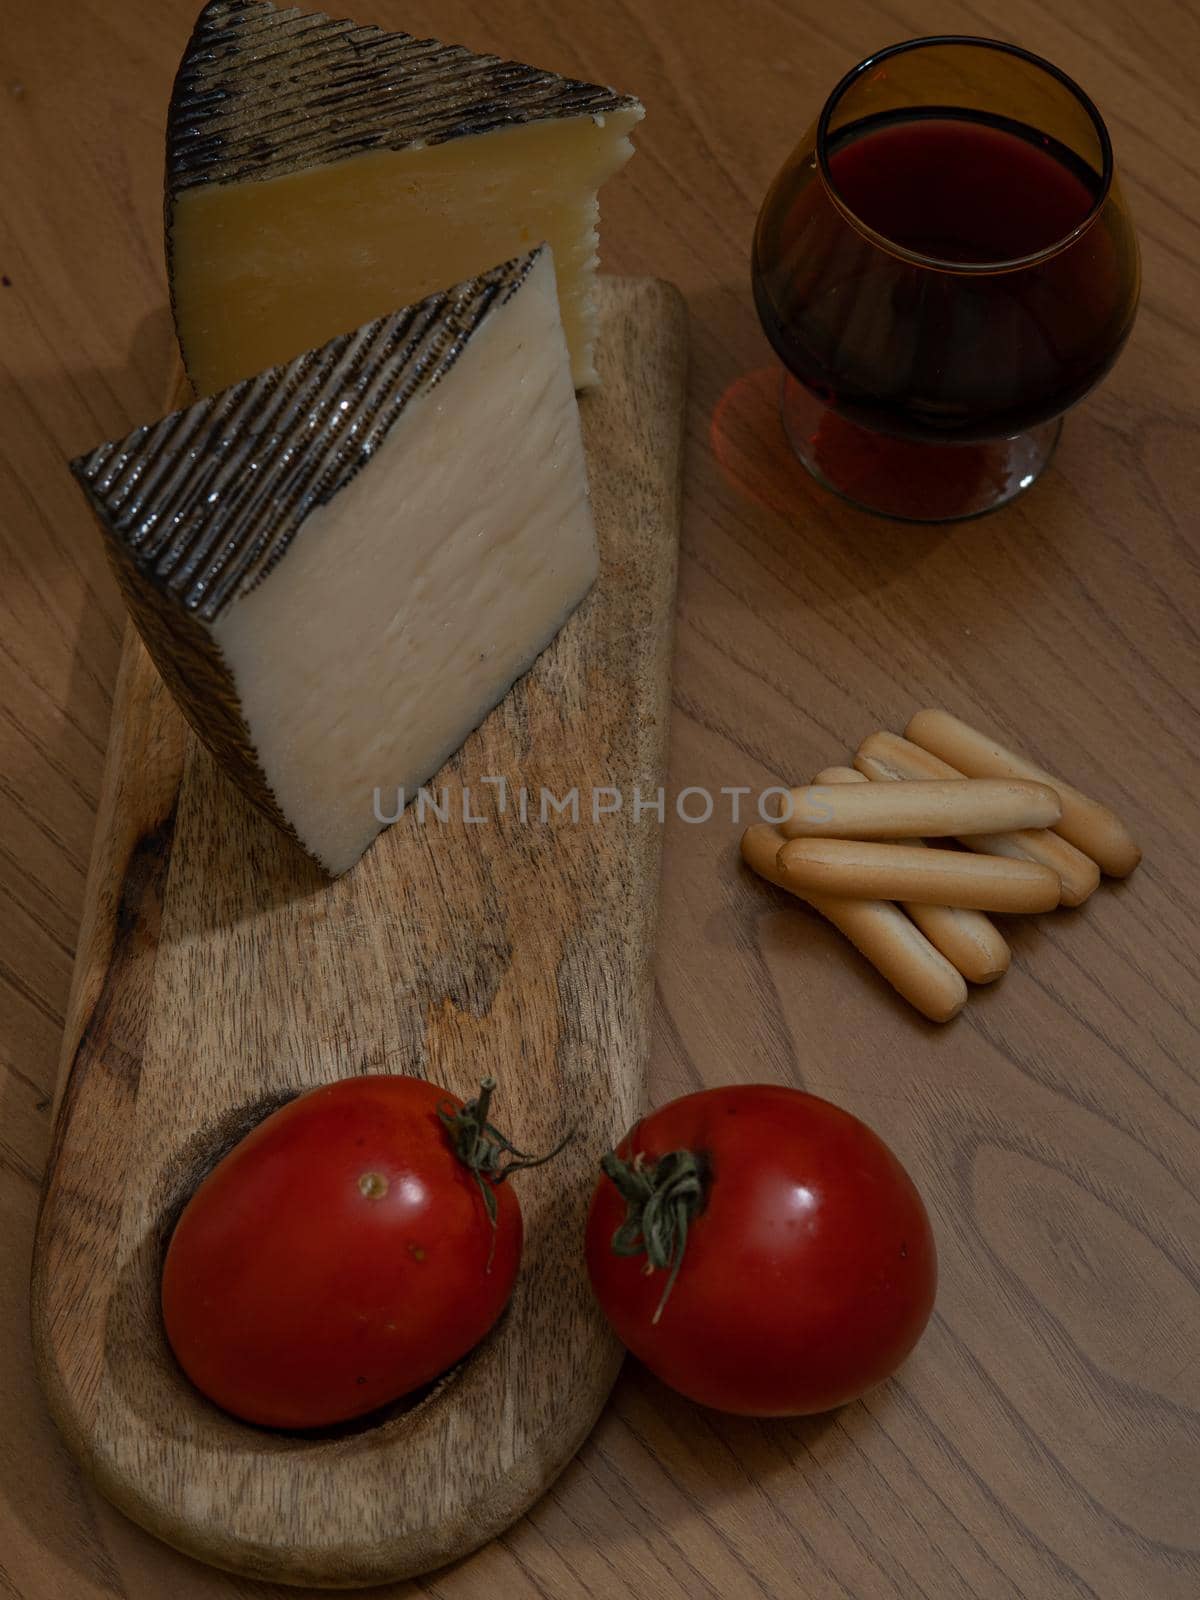 Cheese wedge with tomato and breadsticks on wooden board